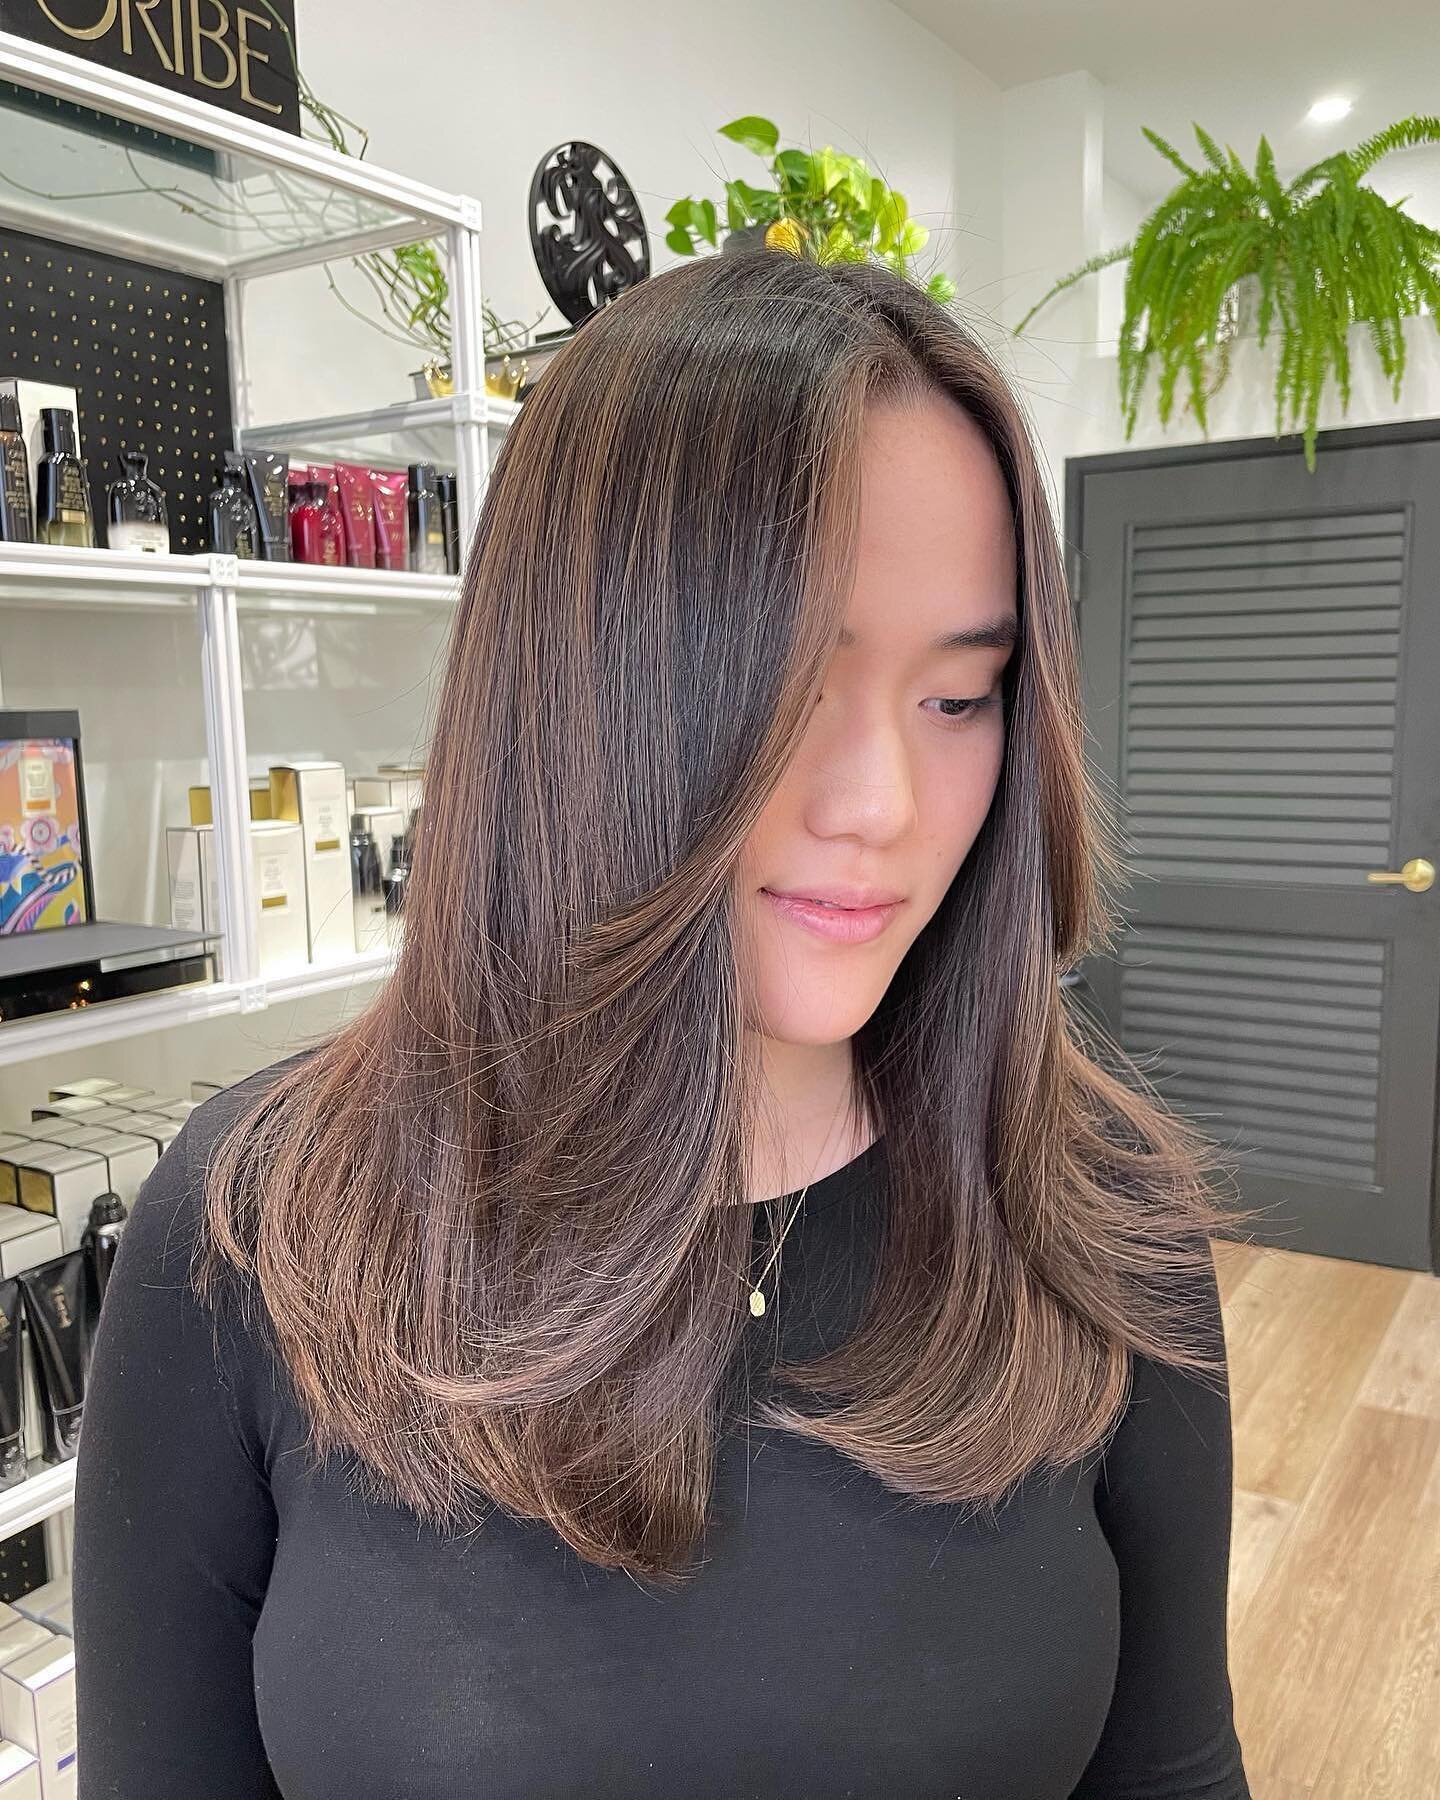 Hair by Maura &bull; @hairstylesbymaura ending the year with this soft bronde on Emily 🤎 

✨Happy New Year 🥂✨

Services: Haircut &amp; Foilyage with treatment, rootsmudge and gloss 
.
.
.
#hairstylesbymaura #limonsalon #limonsalon_wc #sanjosehairsa